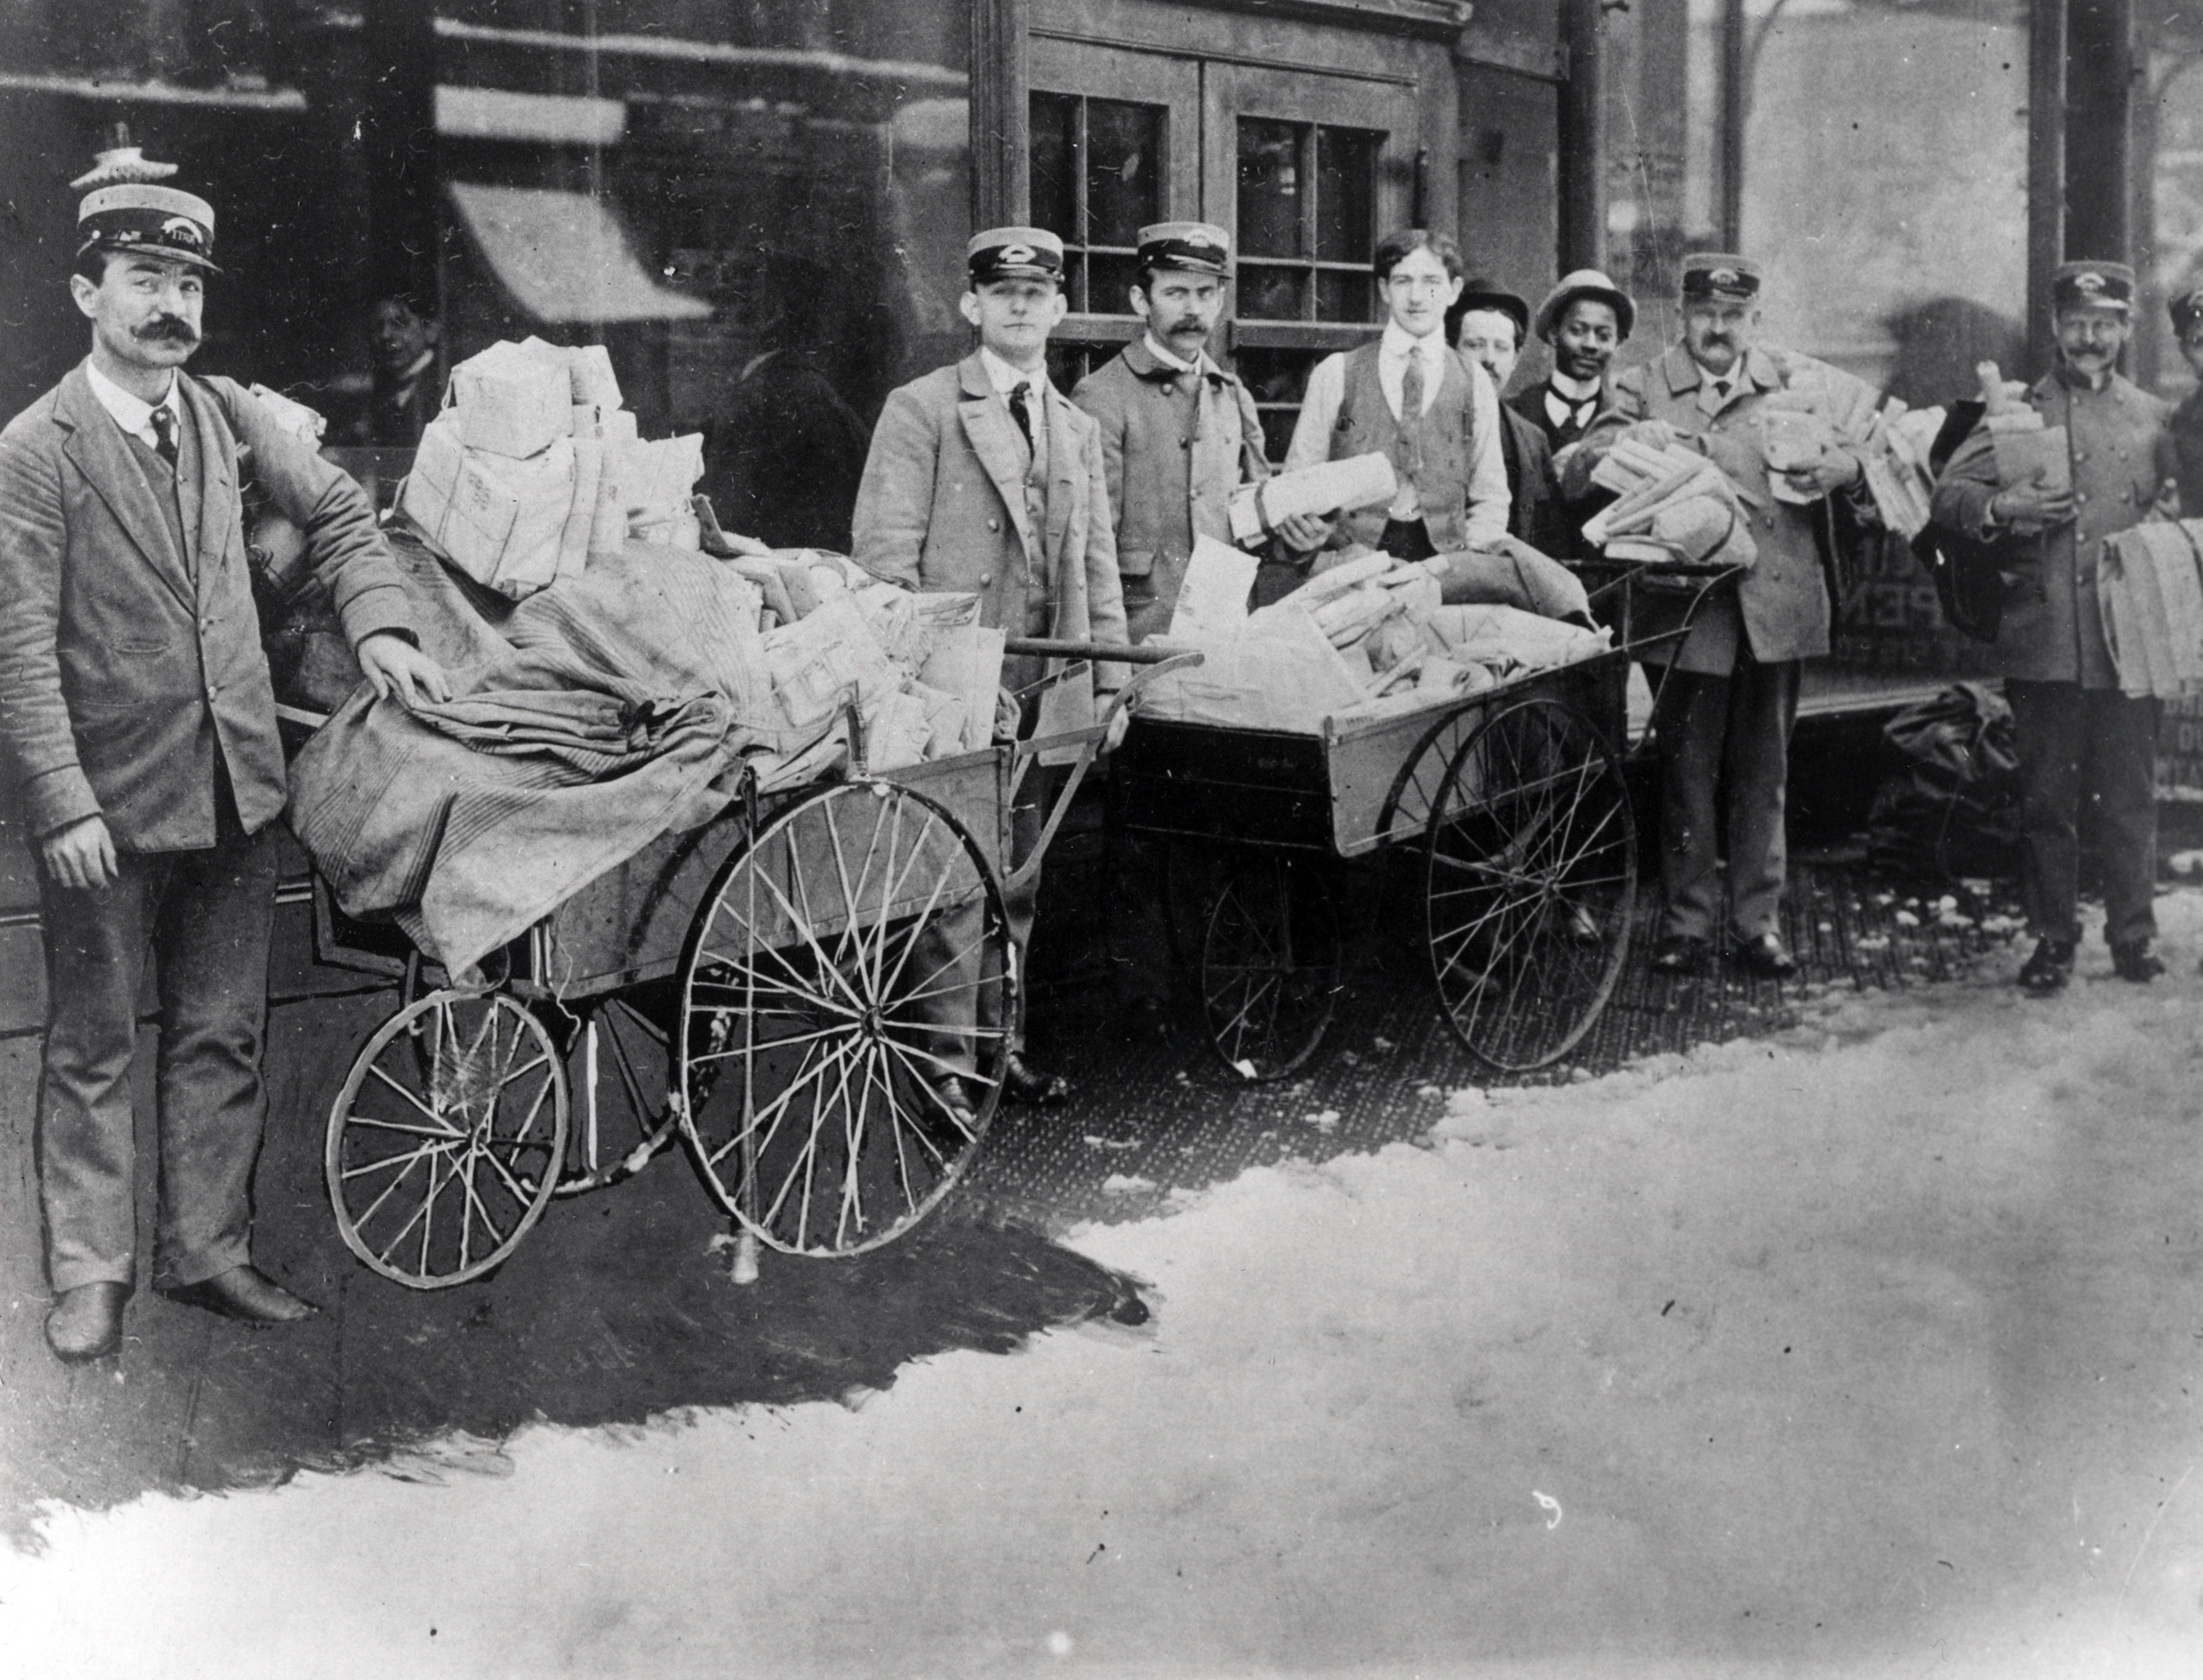 City letter carriers pose with handcarts used to collect and transport mail, 1885.